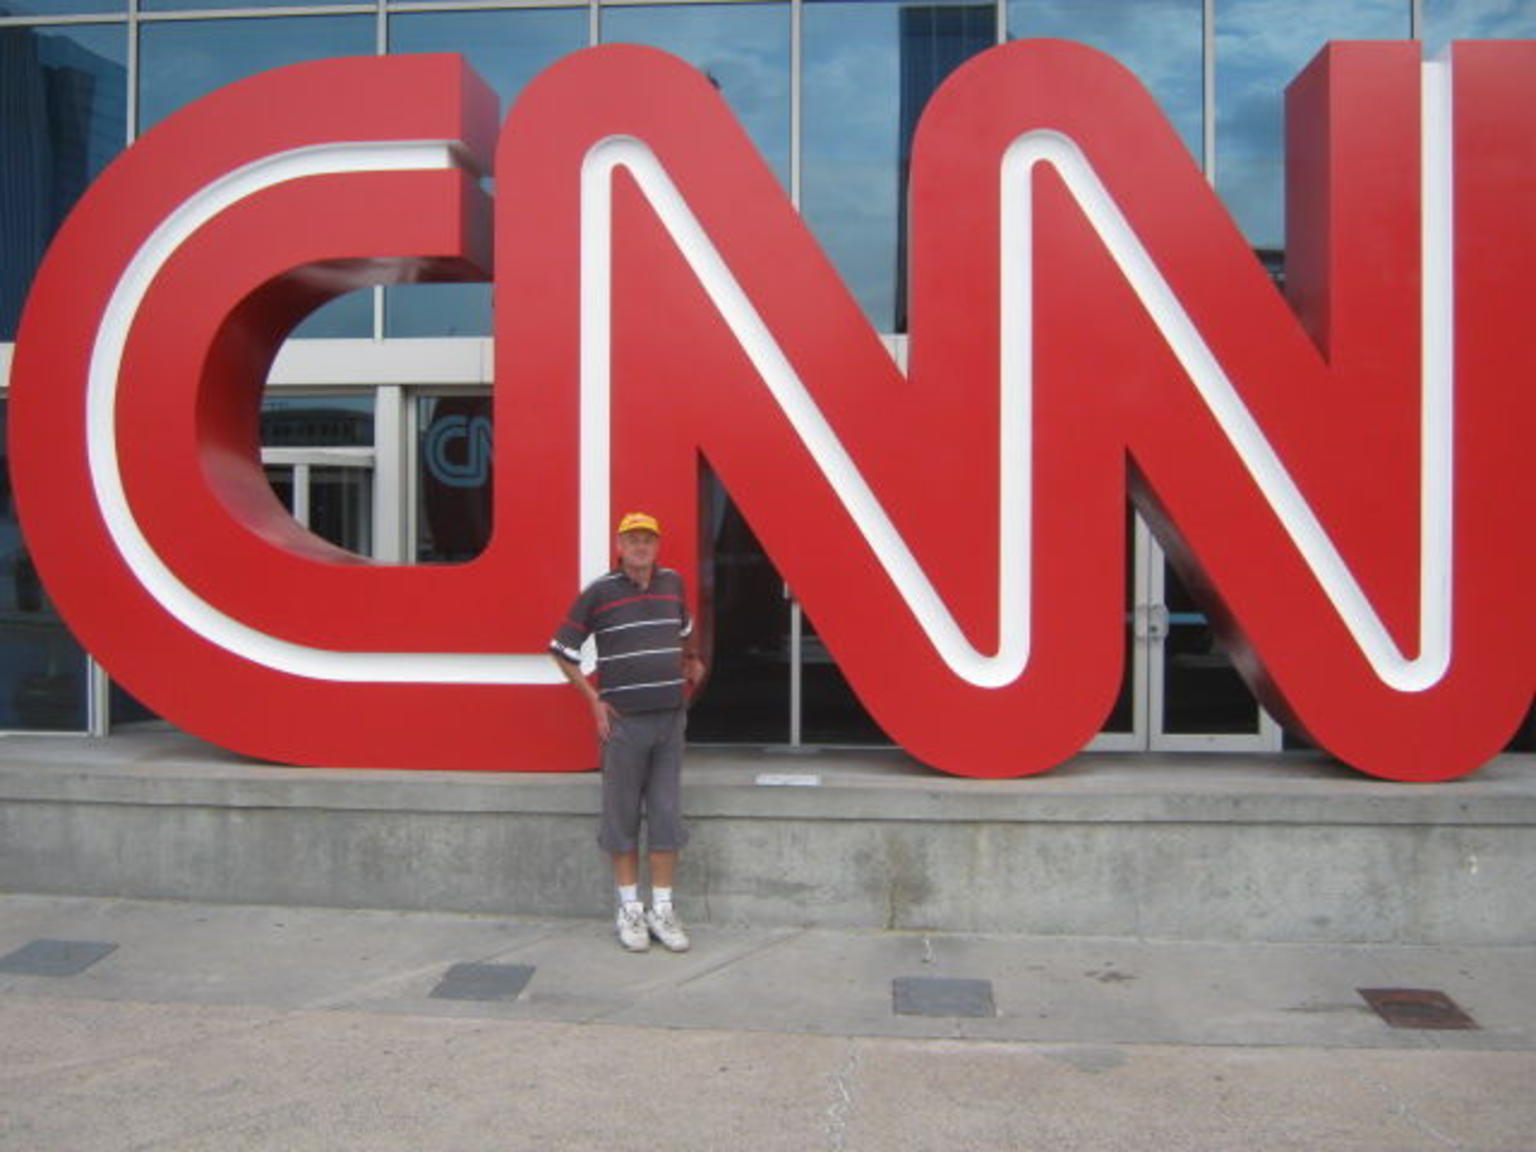 CNN logo at the front of the building